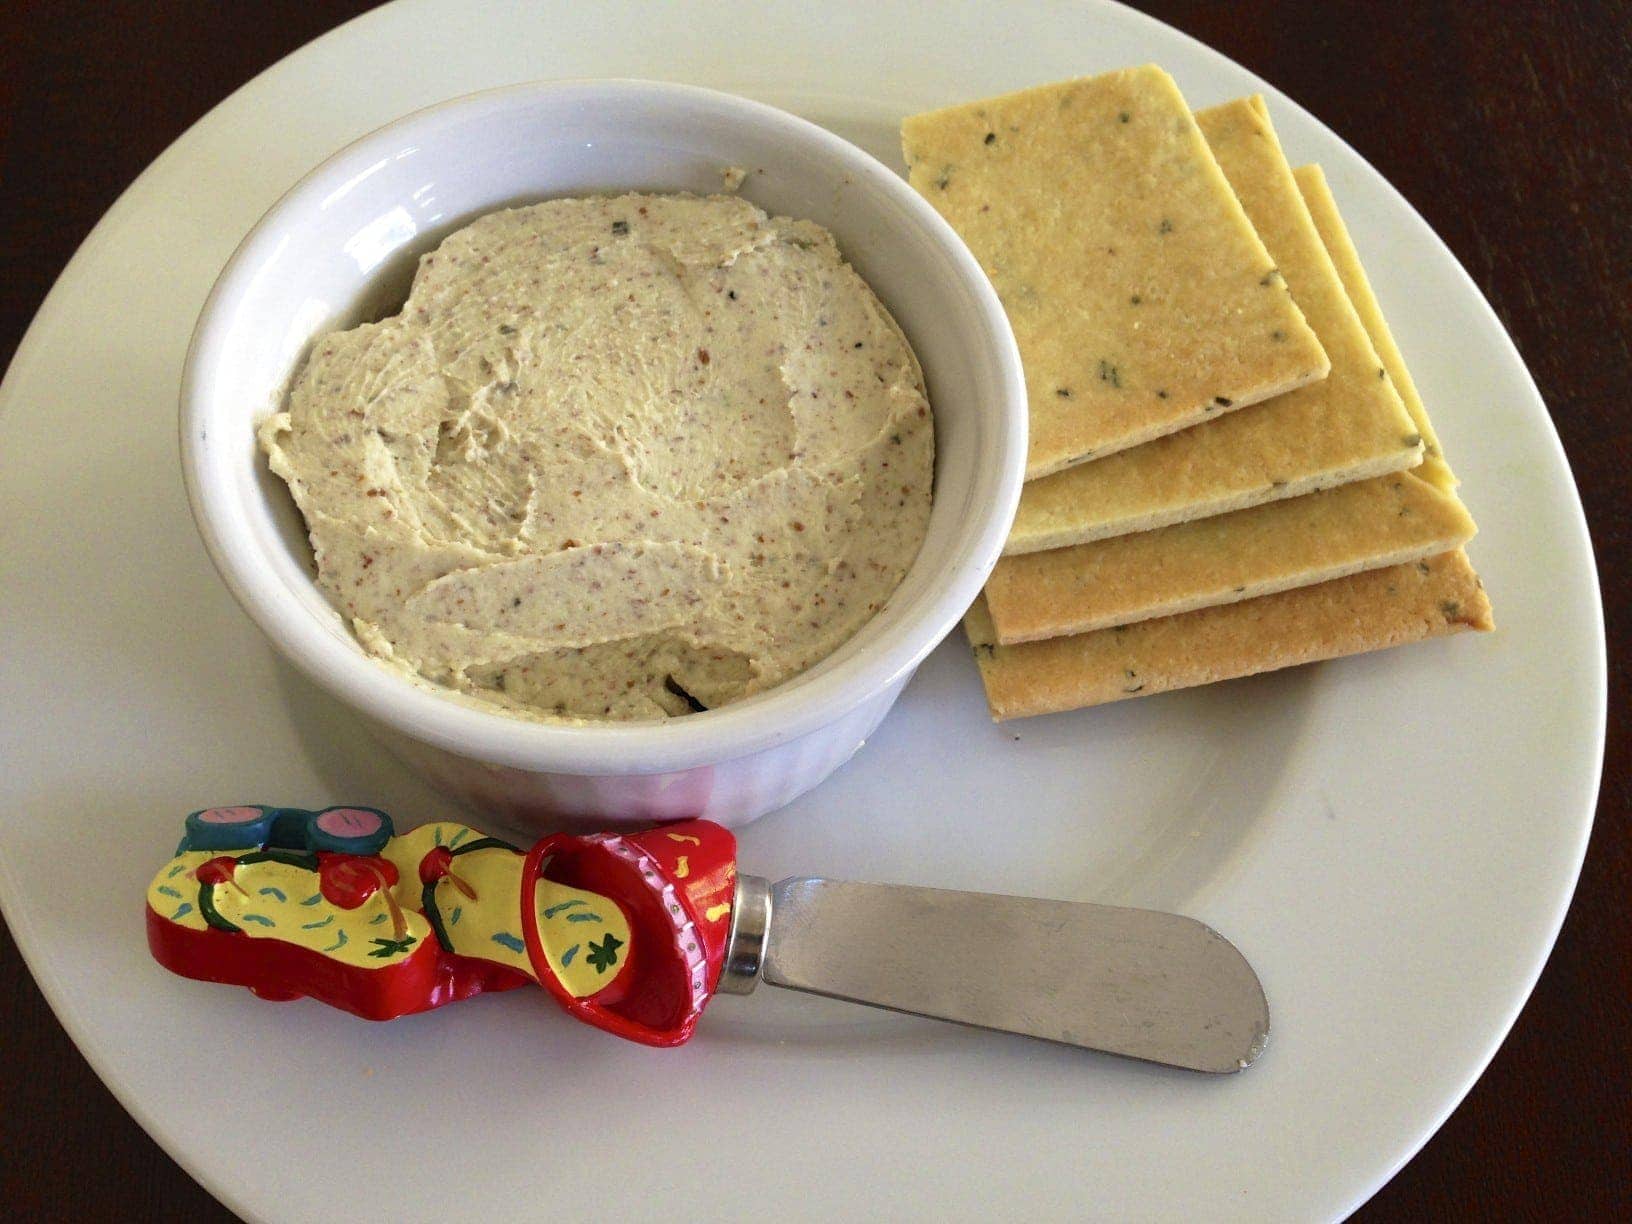 plate of homemade gluten free basil crackers next to a small serving dish with roasted garlic basil cheese dip